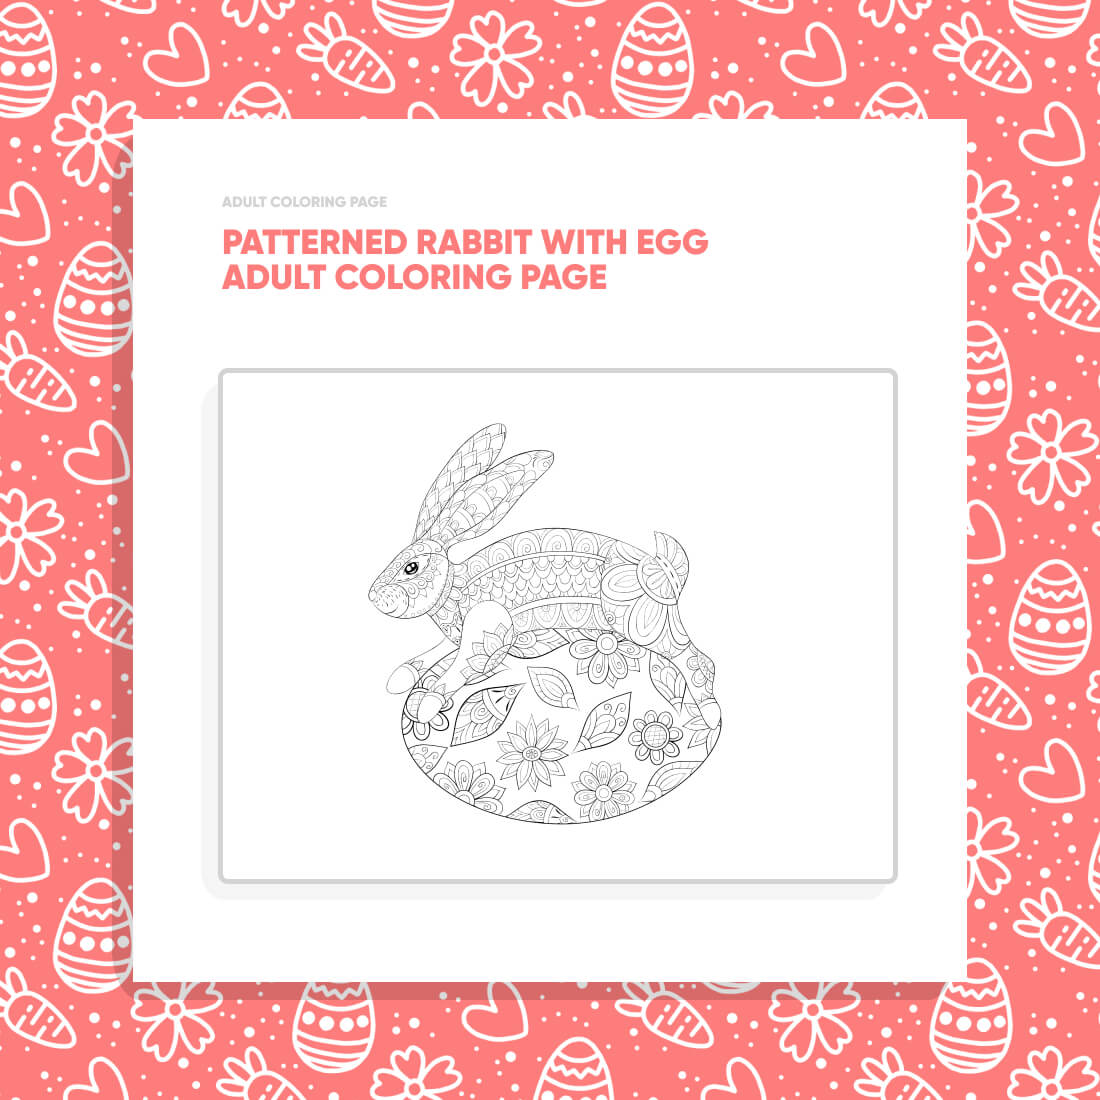 Patterned Rabbit with Egg Adult Coloring Page cover image.